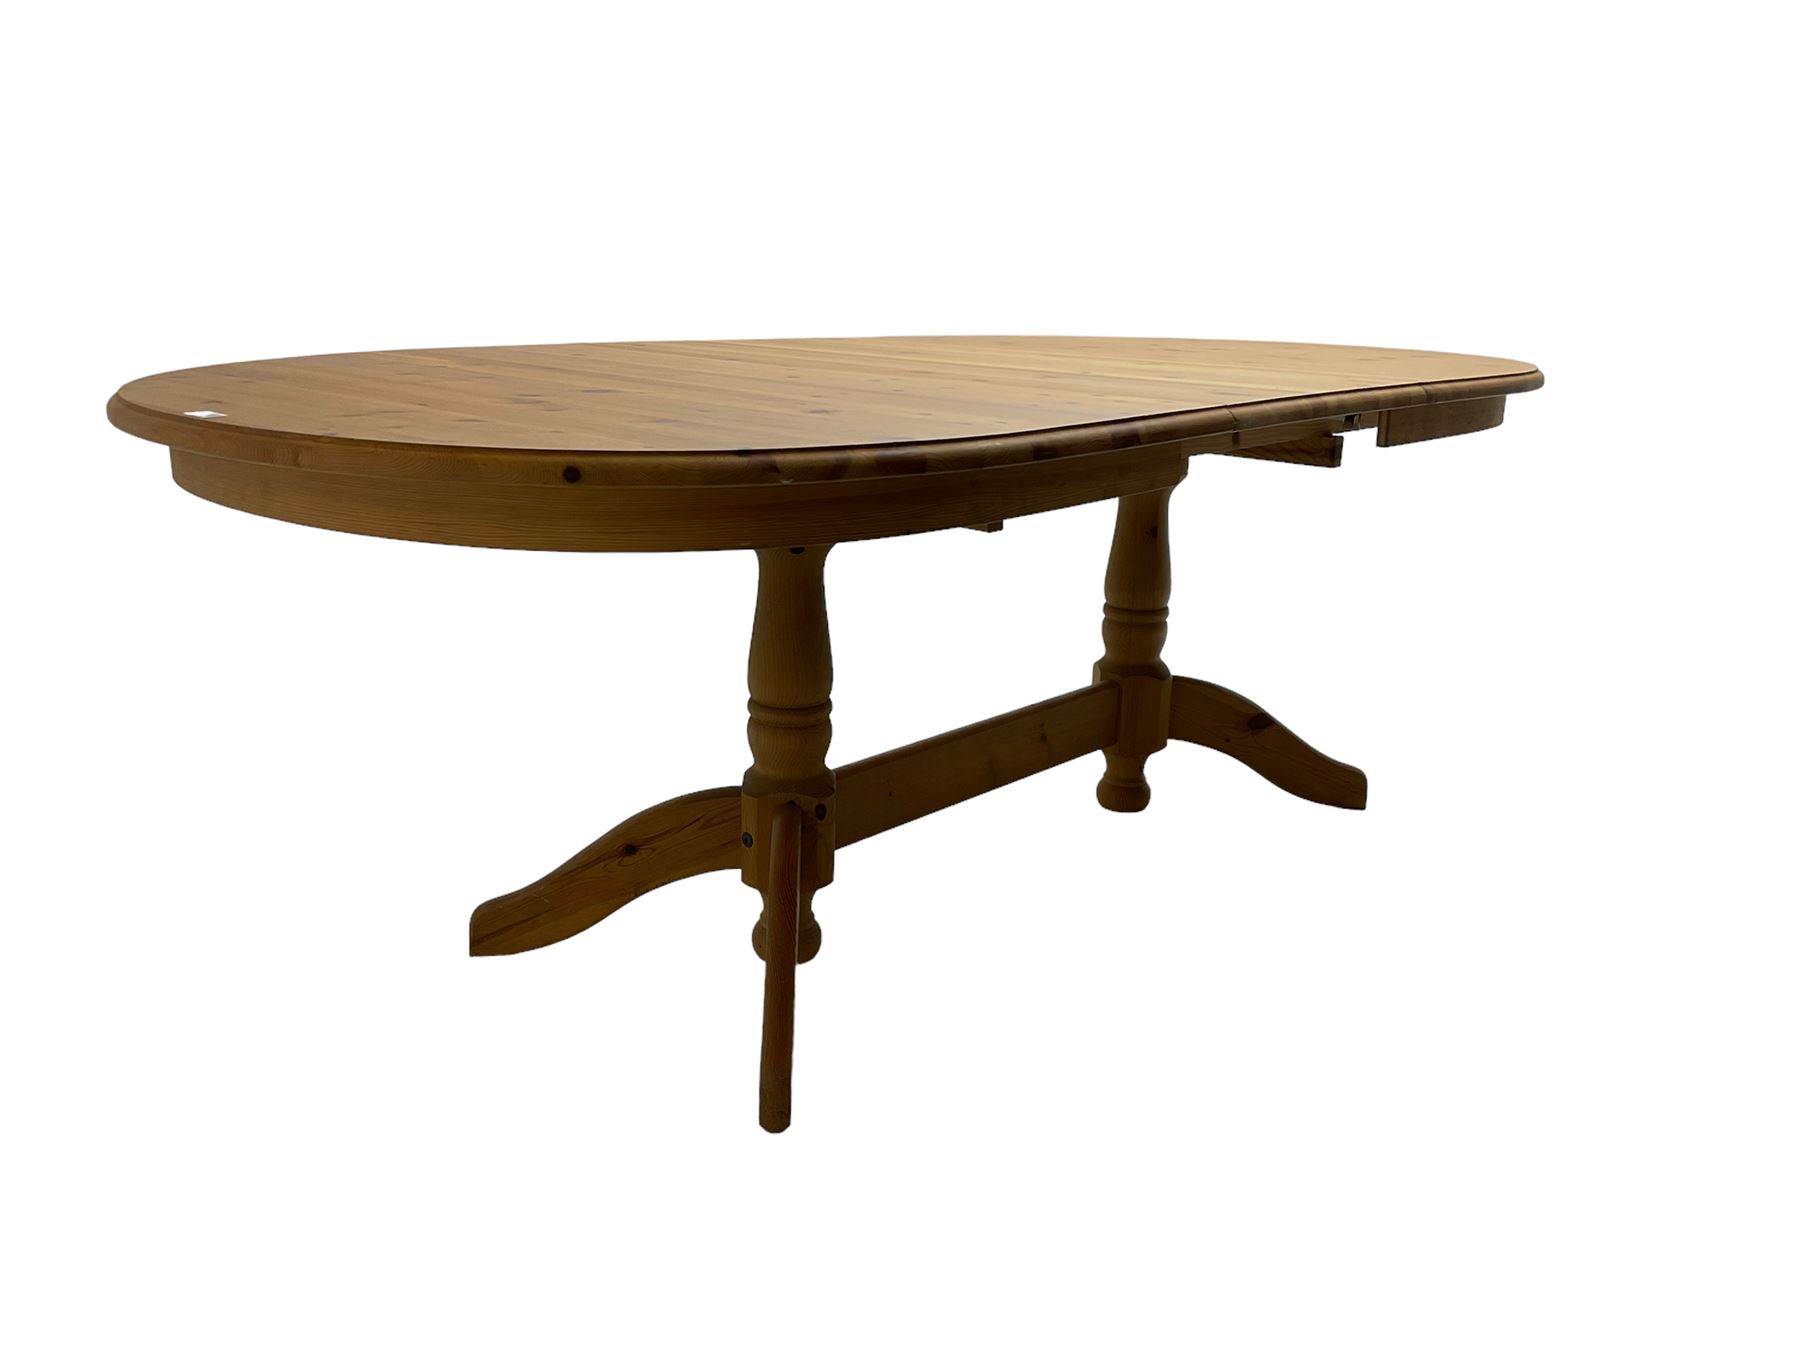 Pine extending dining table with additional leaf - Image 6 of 7